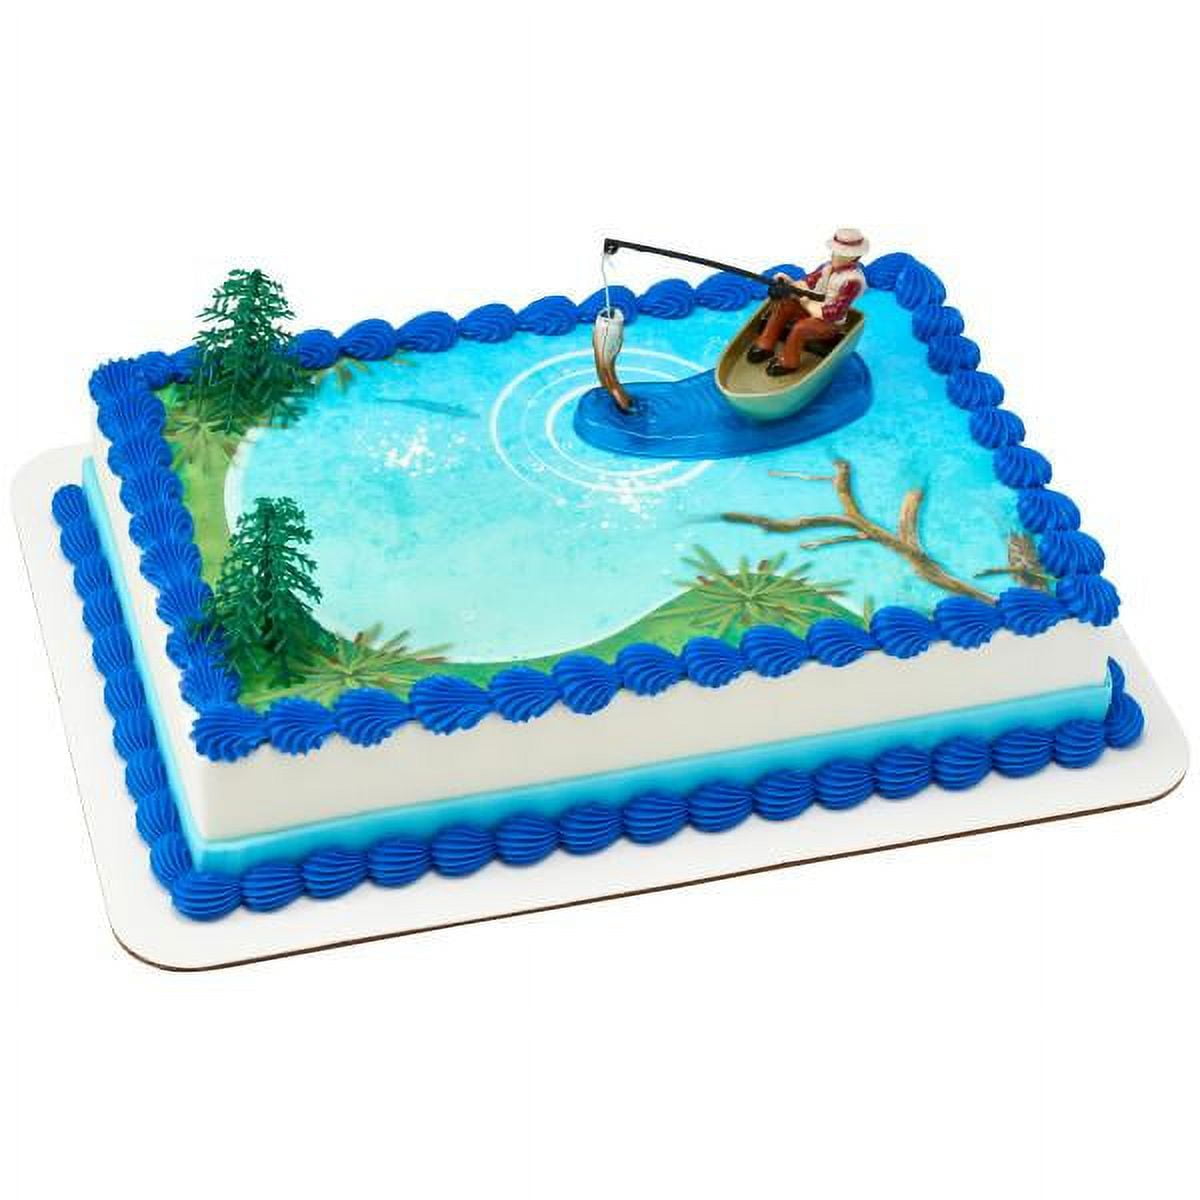 Fishing with Action DecoSet with 1/4 sheet Edible Cake Topper